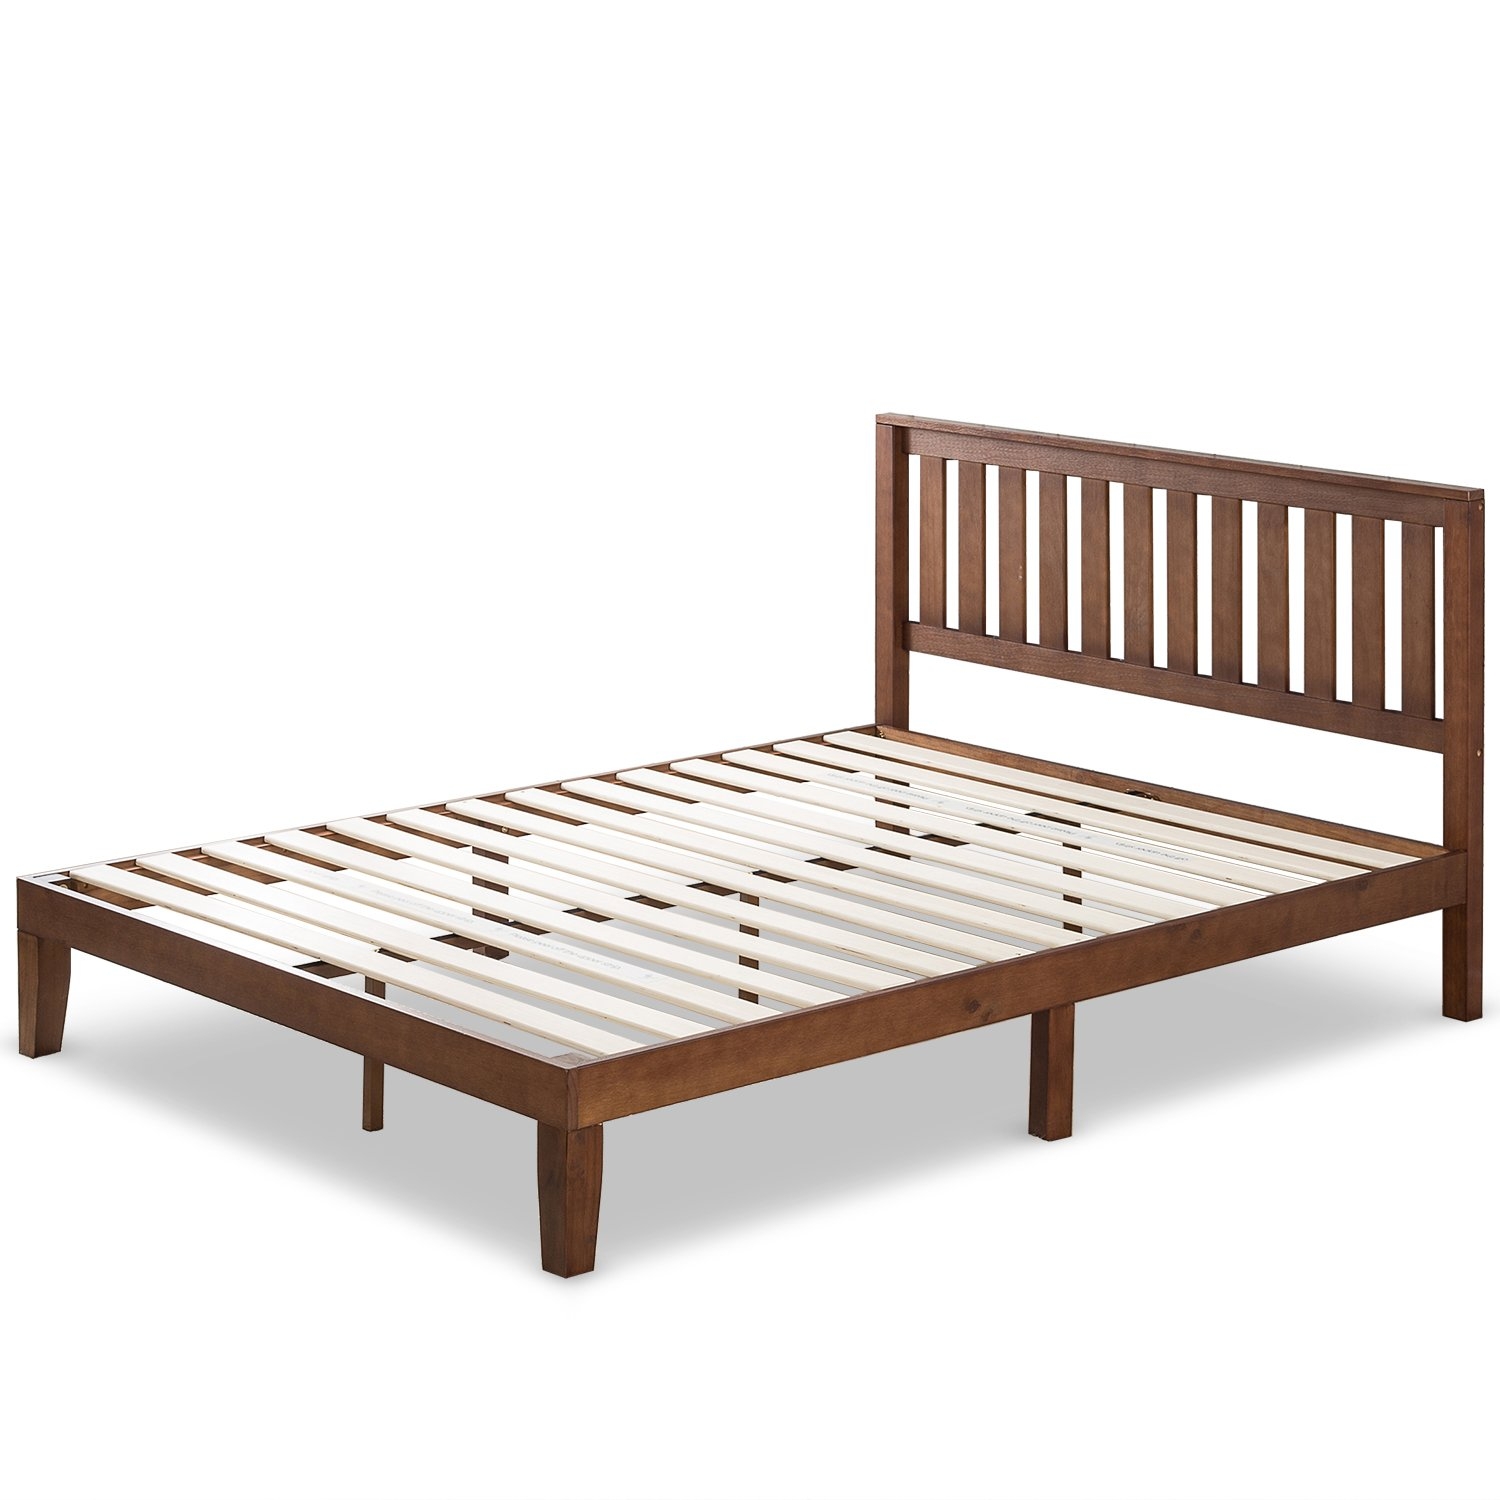 Solid Platform Bed No Slats Visualhunt, What Is A Bed Without Headboard Called